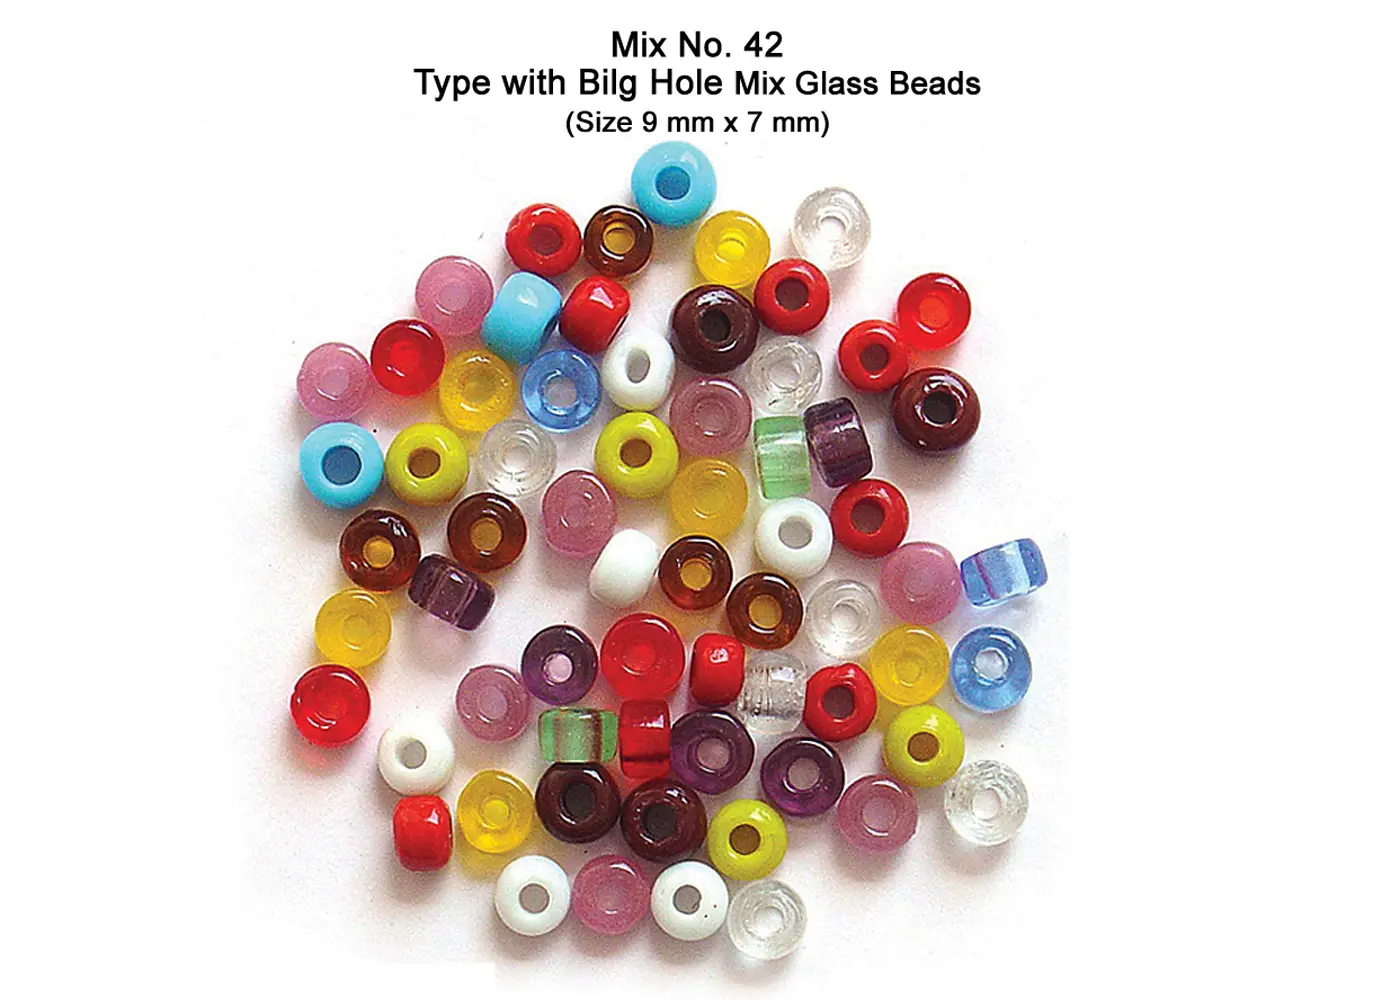 Tyre with Big Hole Mix Glass Beads (Size 9 mm x 7 mm)